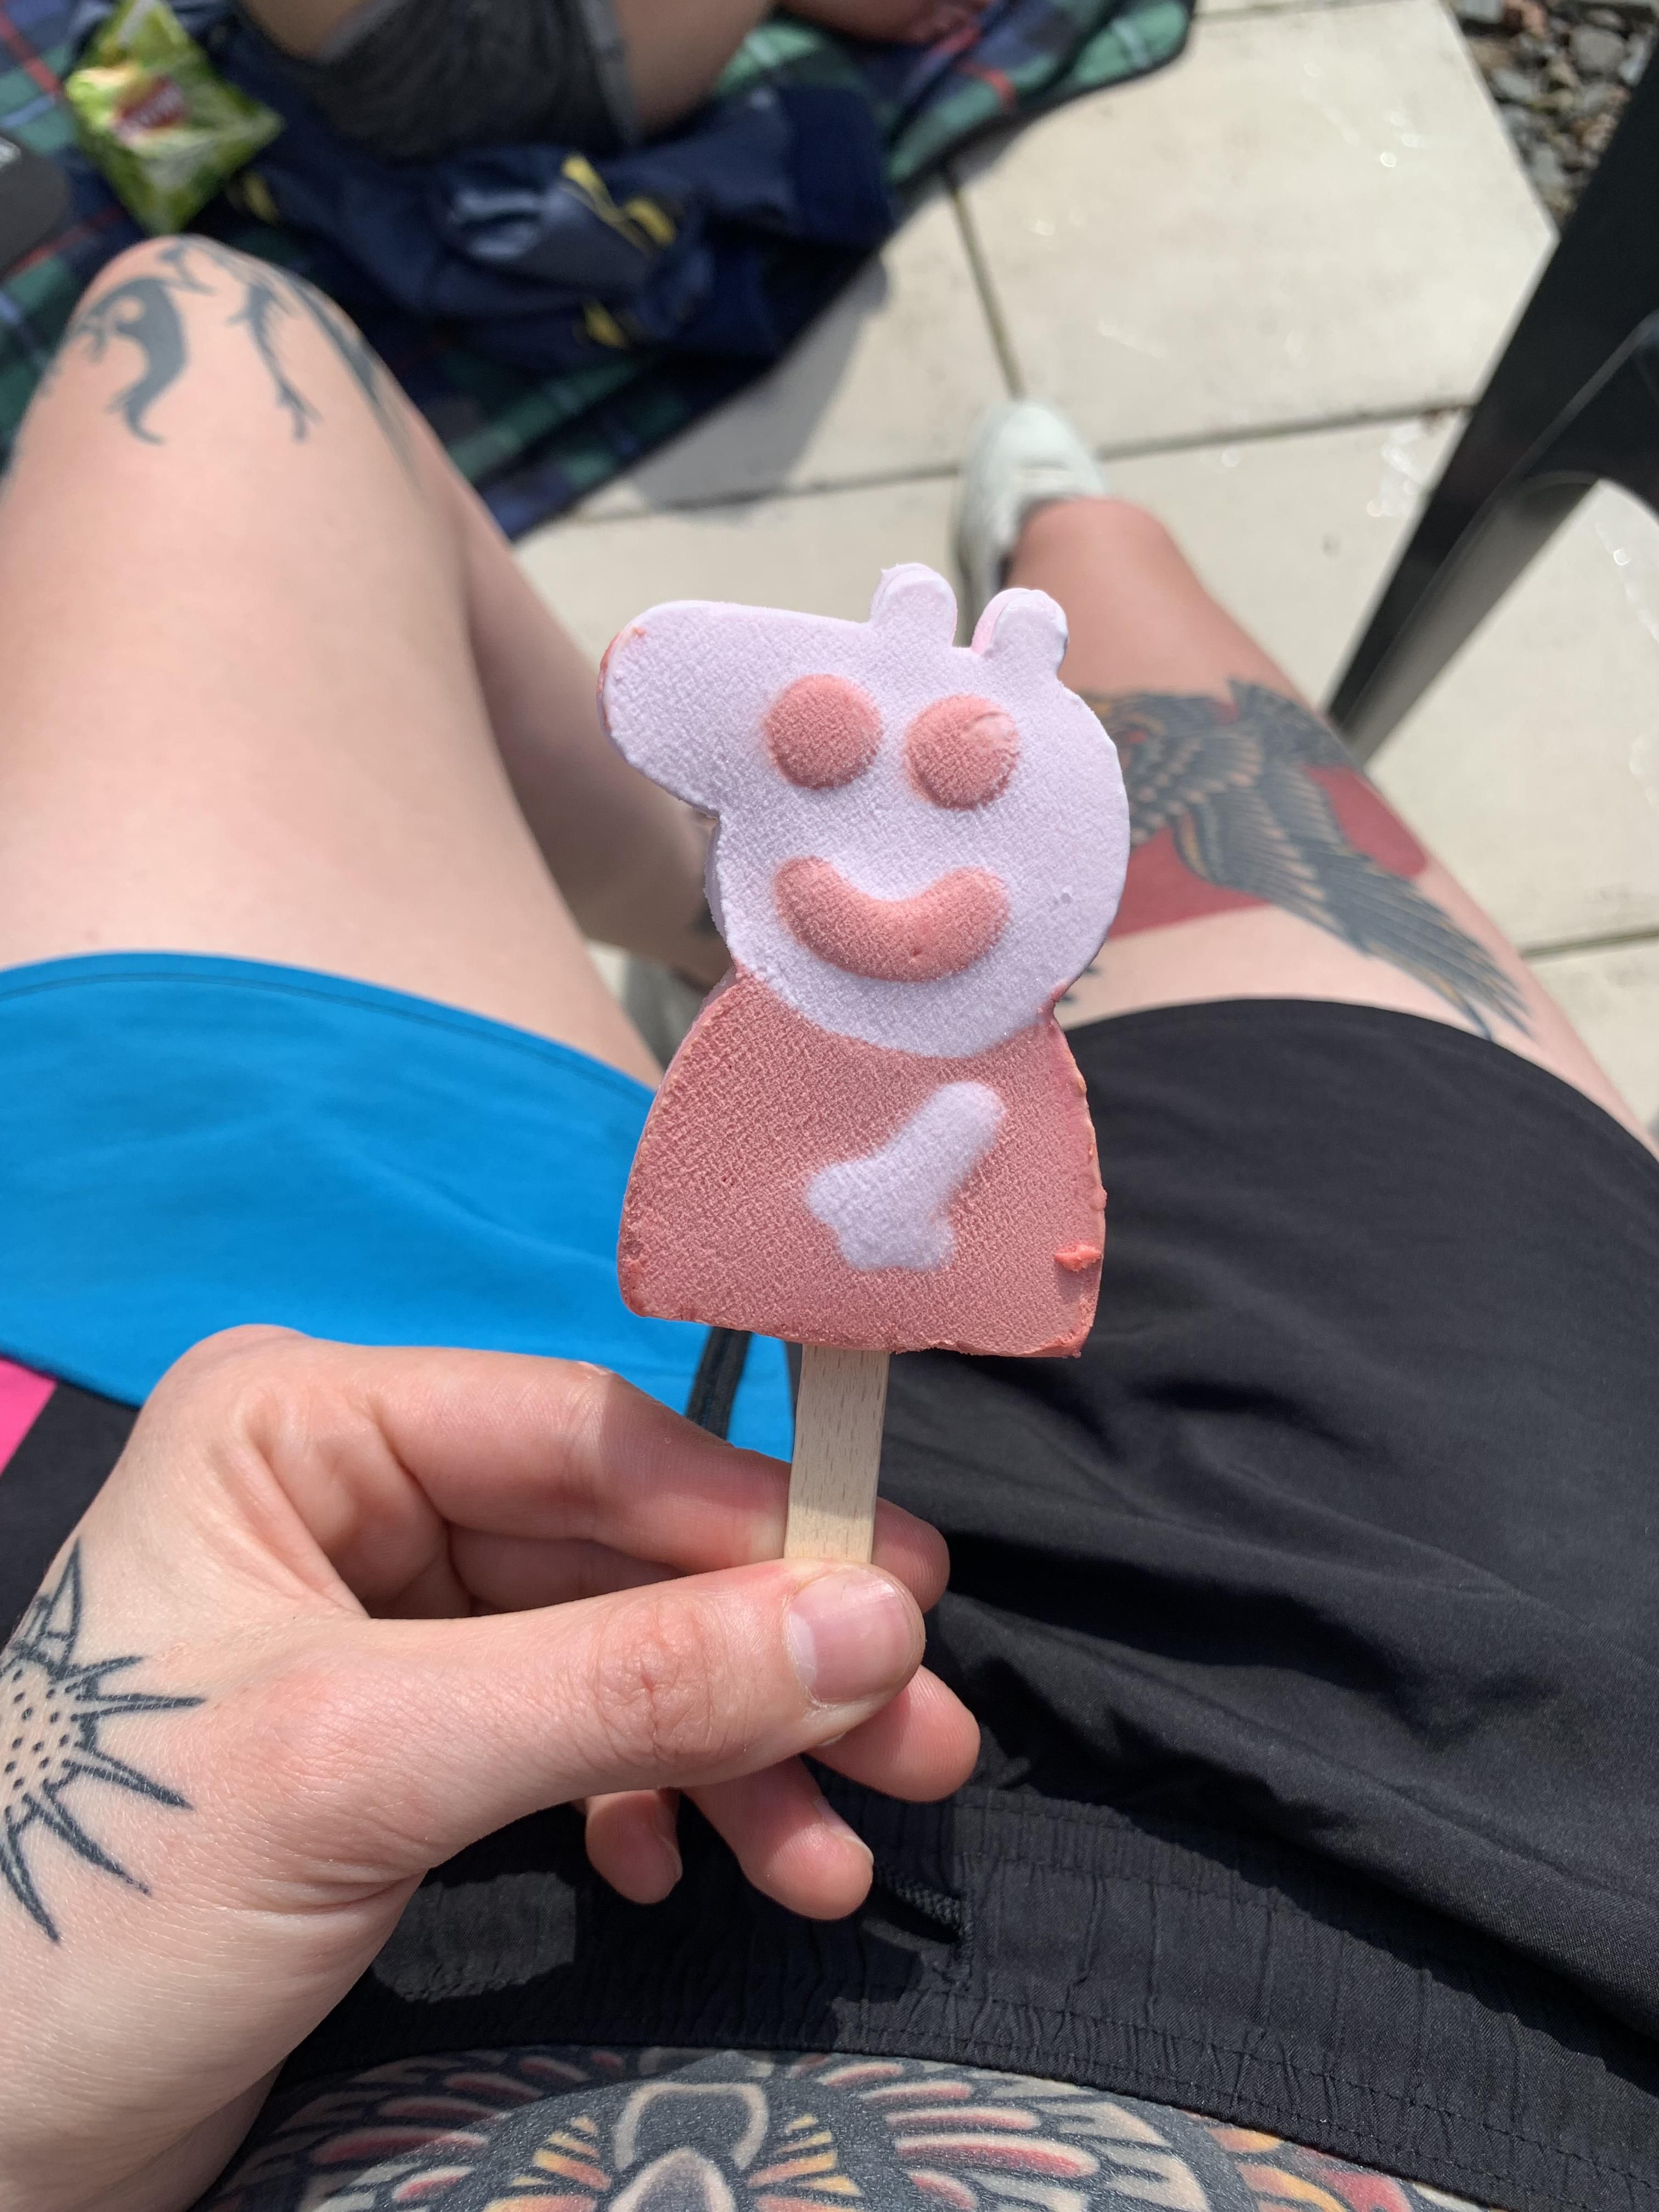 My peppa pig ice cream is a bit questionable..